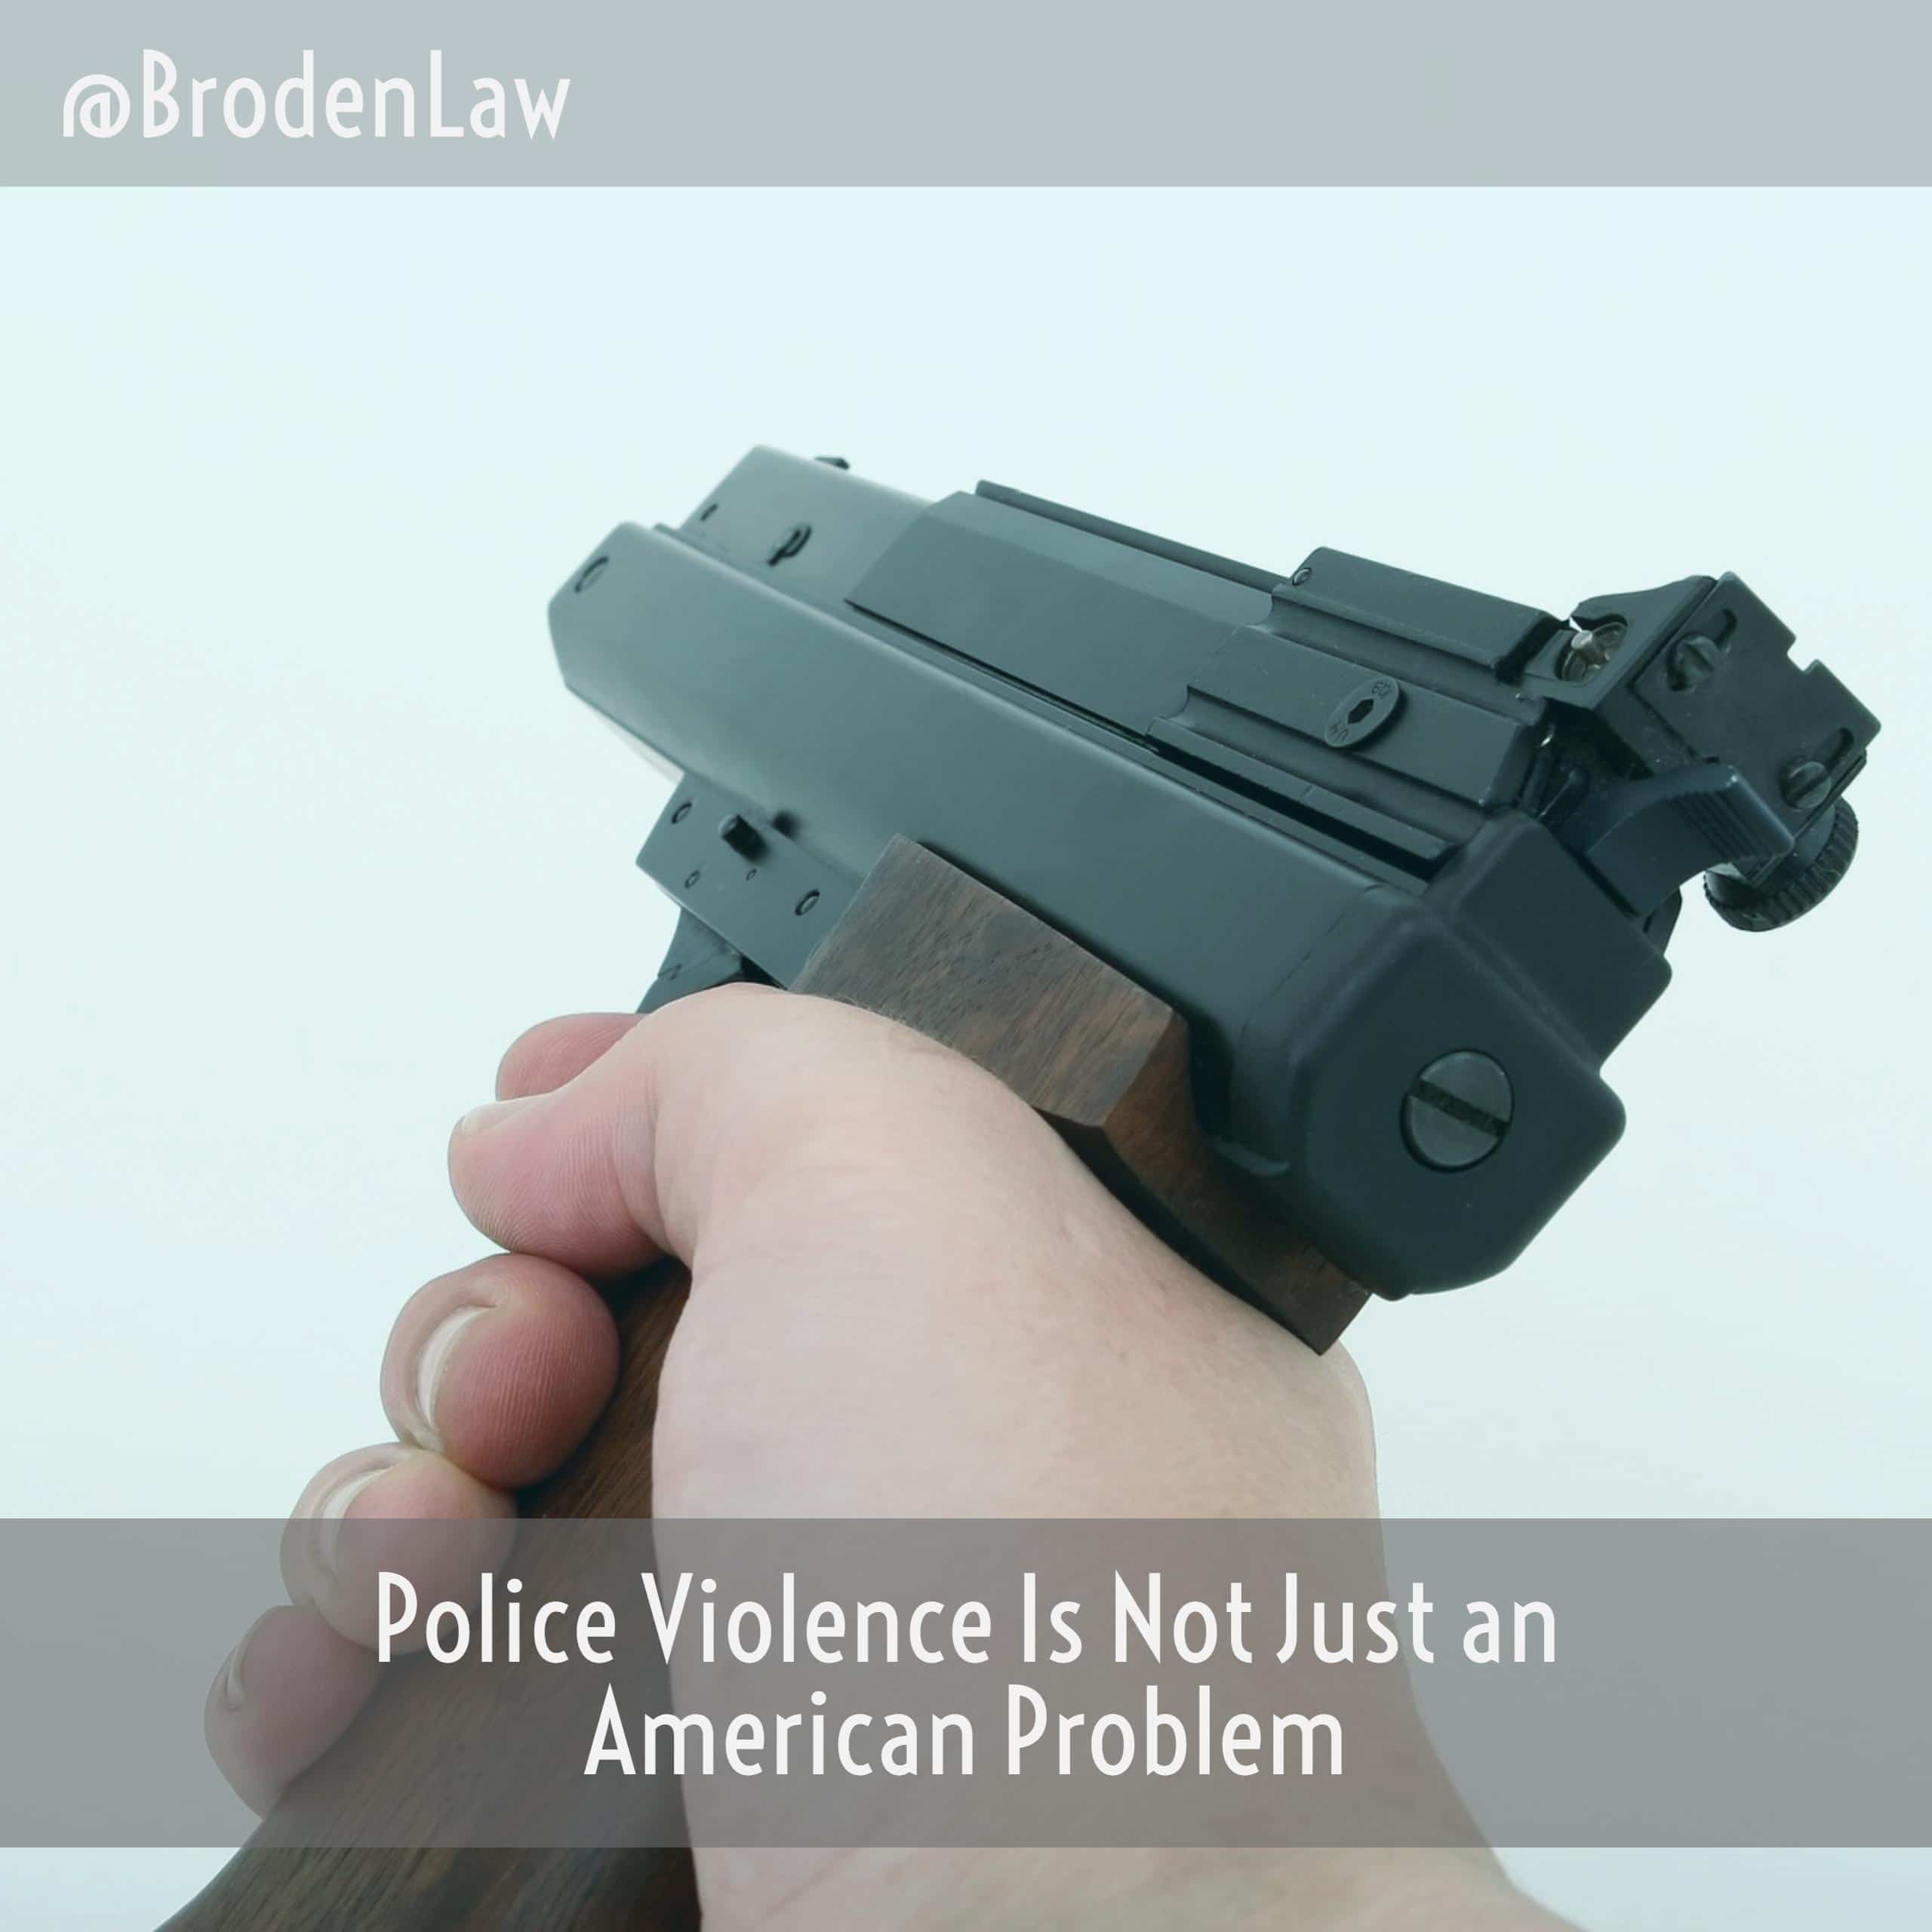 Police Violence Is Not Just an American Problem